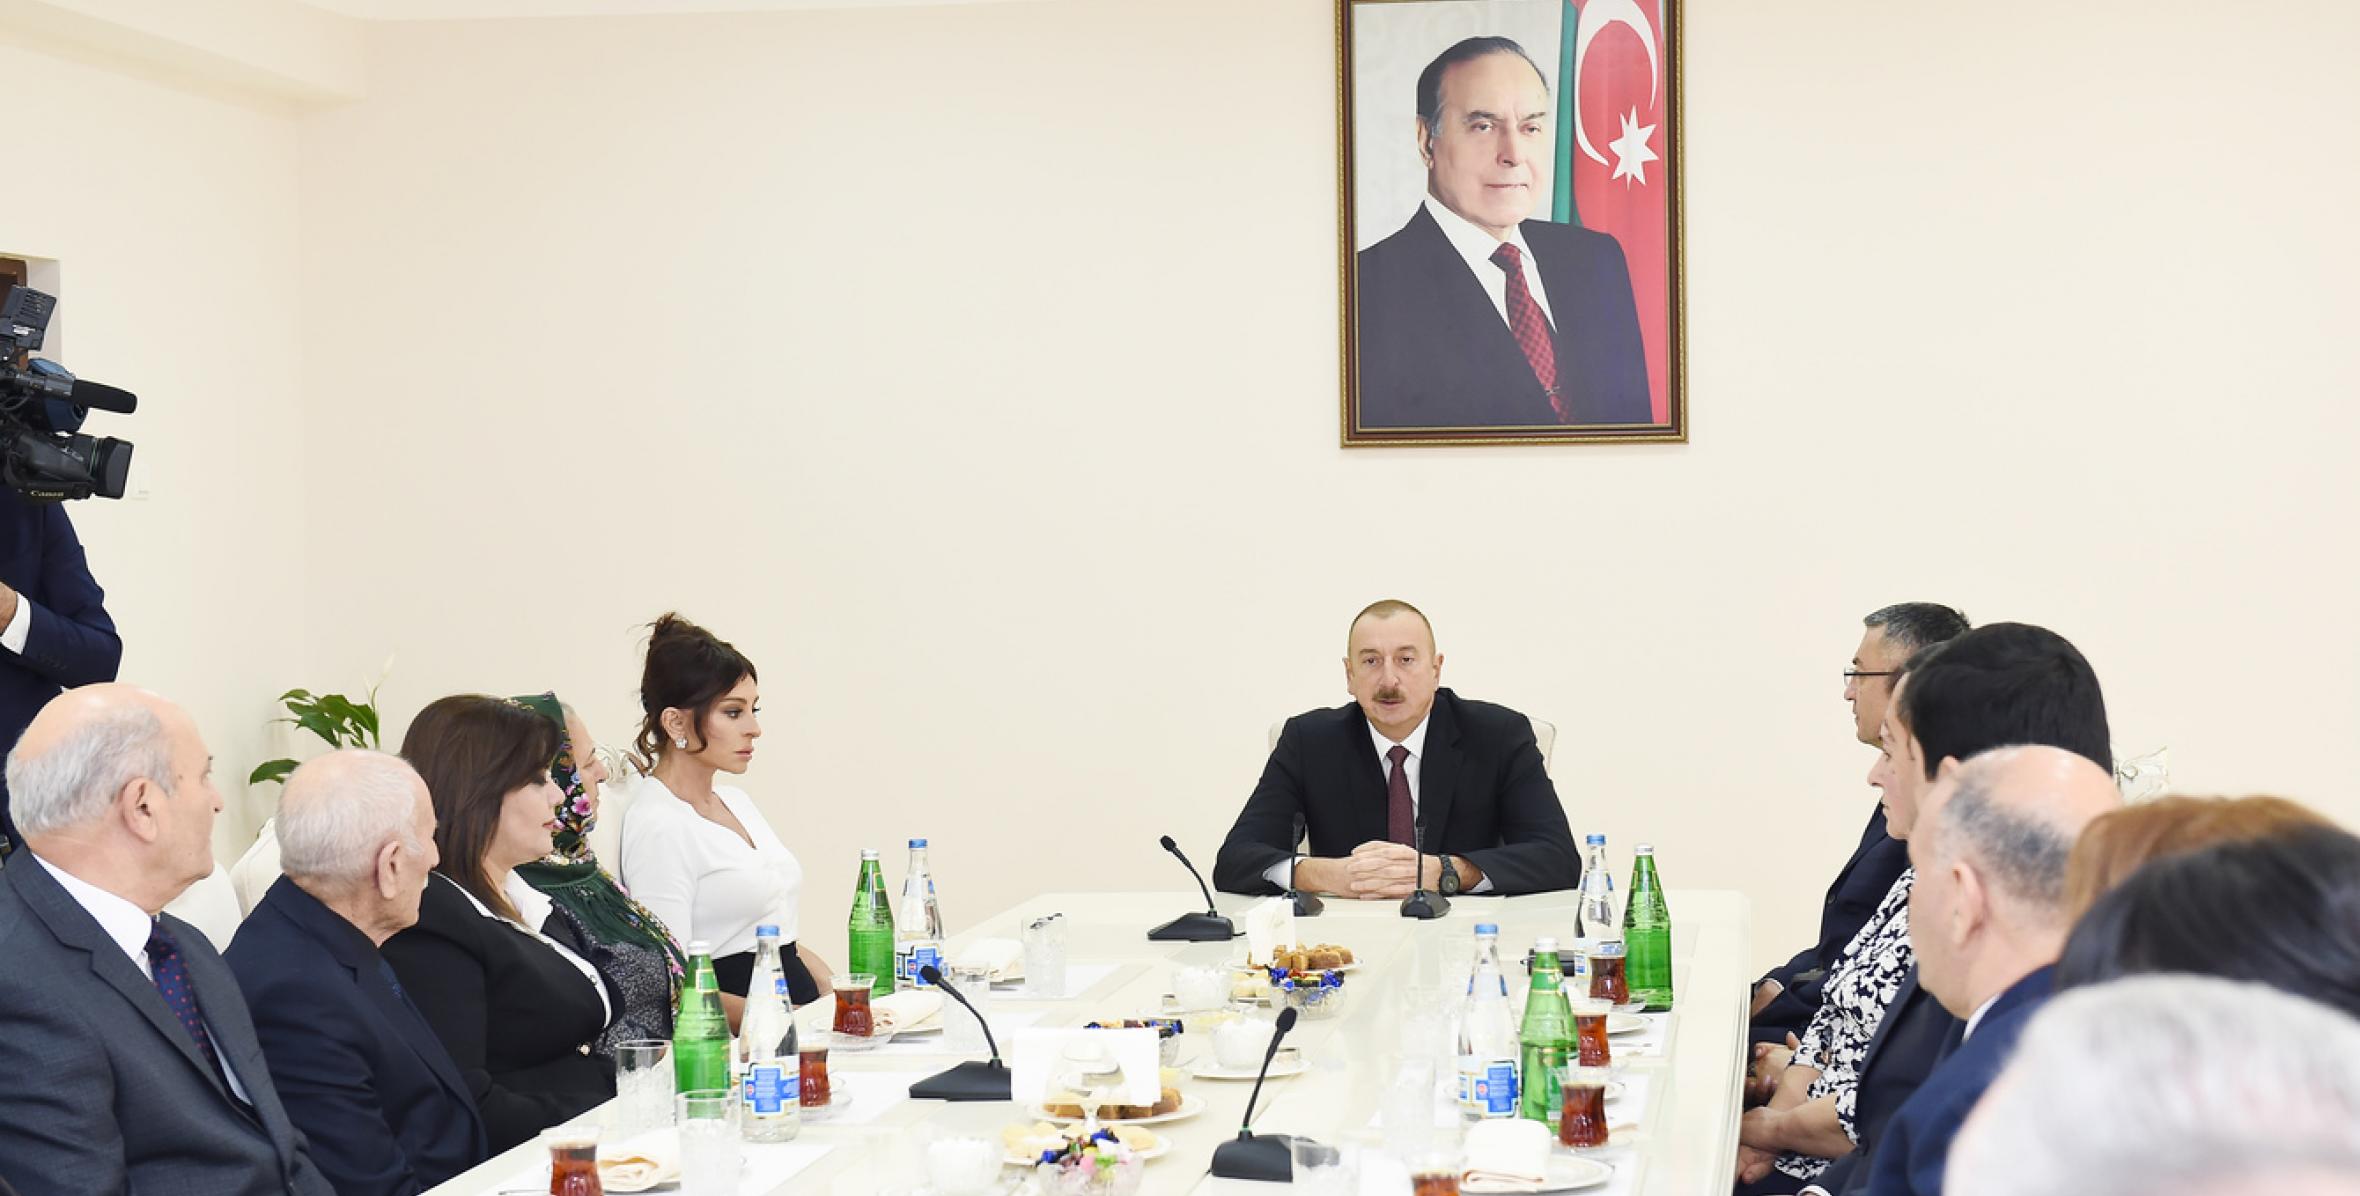 Speech by Ilham Aliyev at the opening residential complex for IDP families in Absheron district